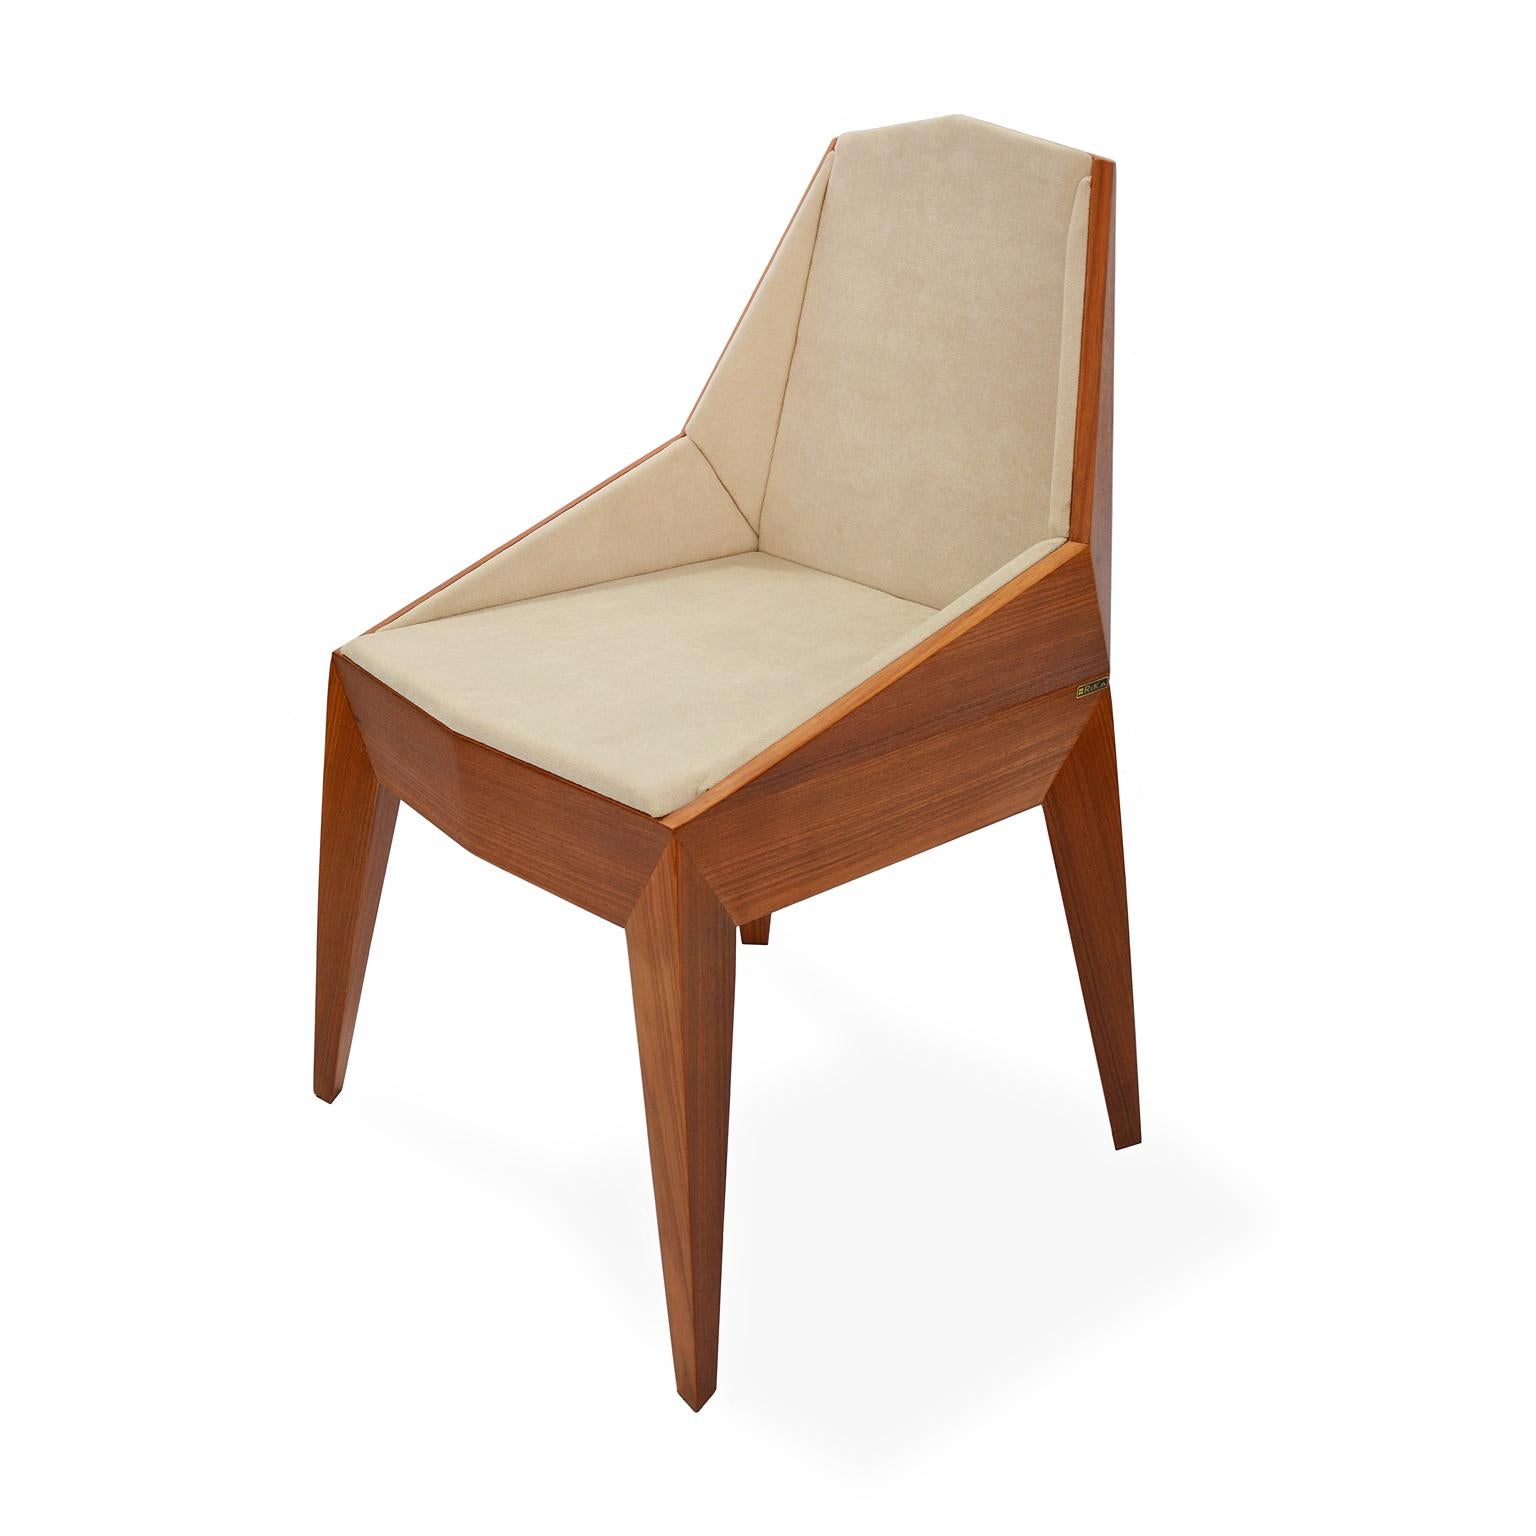 Veneer Faceted Wood Chair, Triarm, Contemporary Brazilian Design For Sale